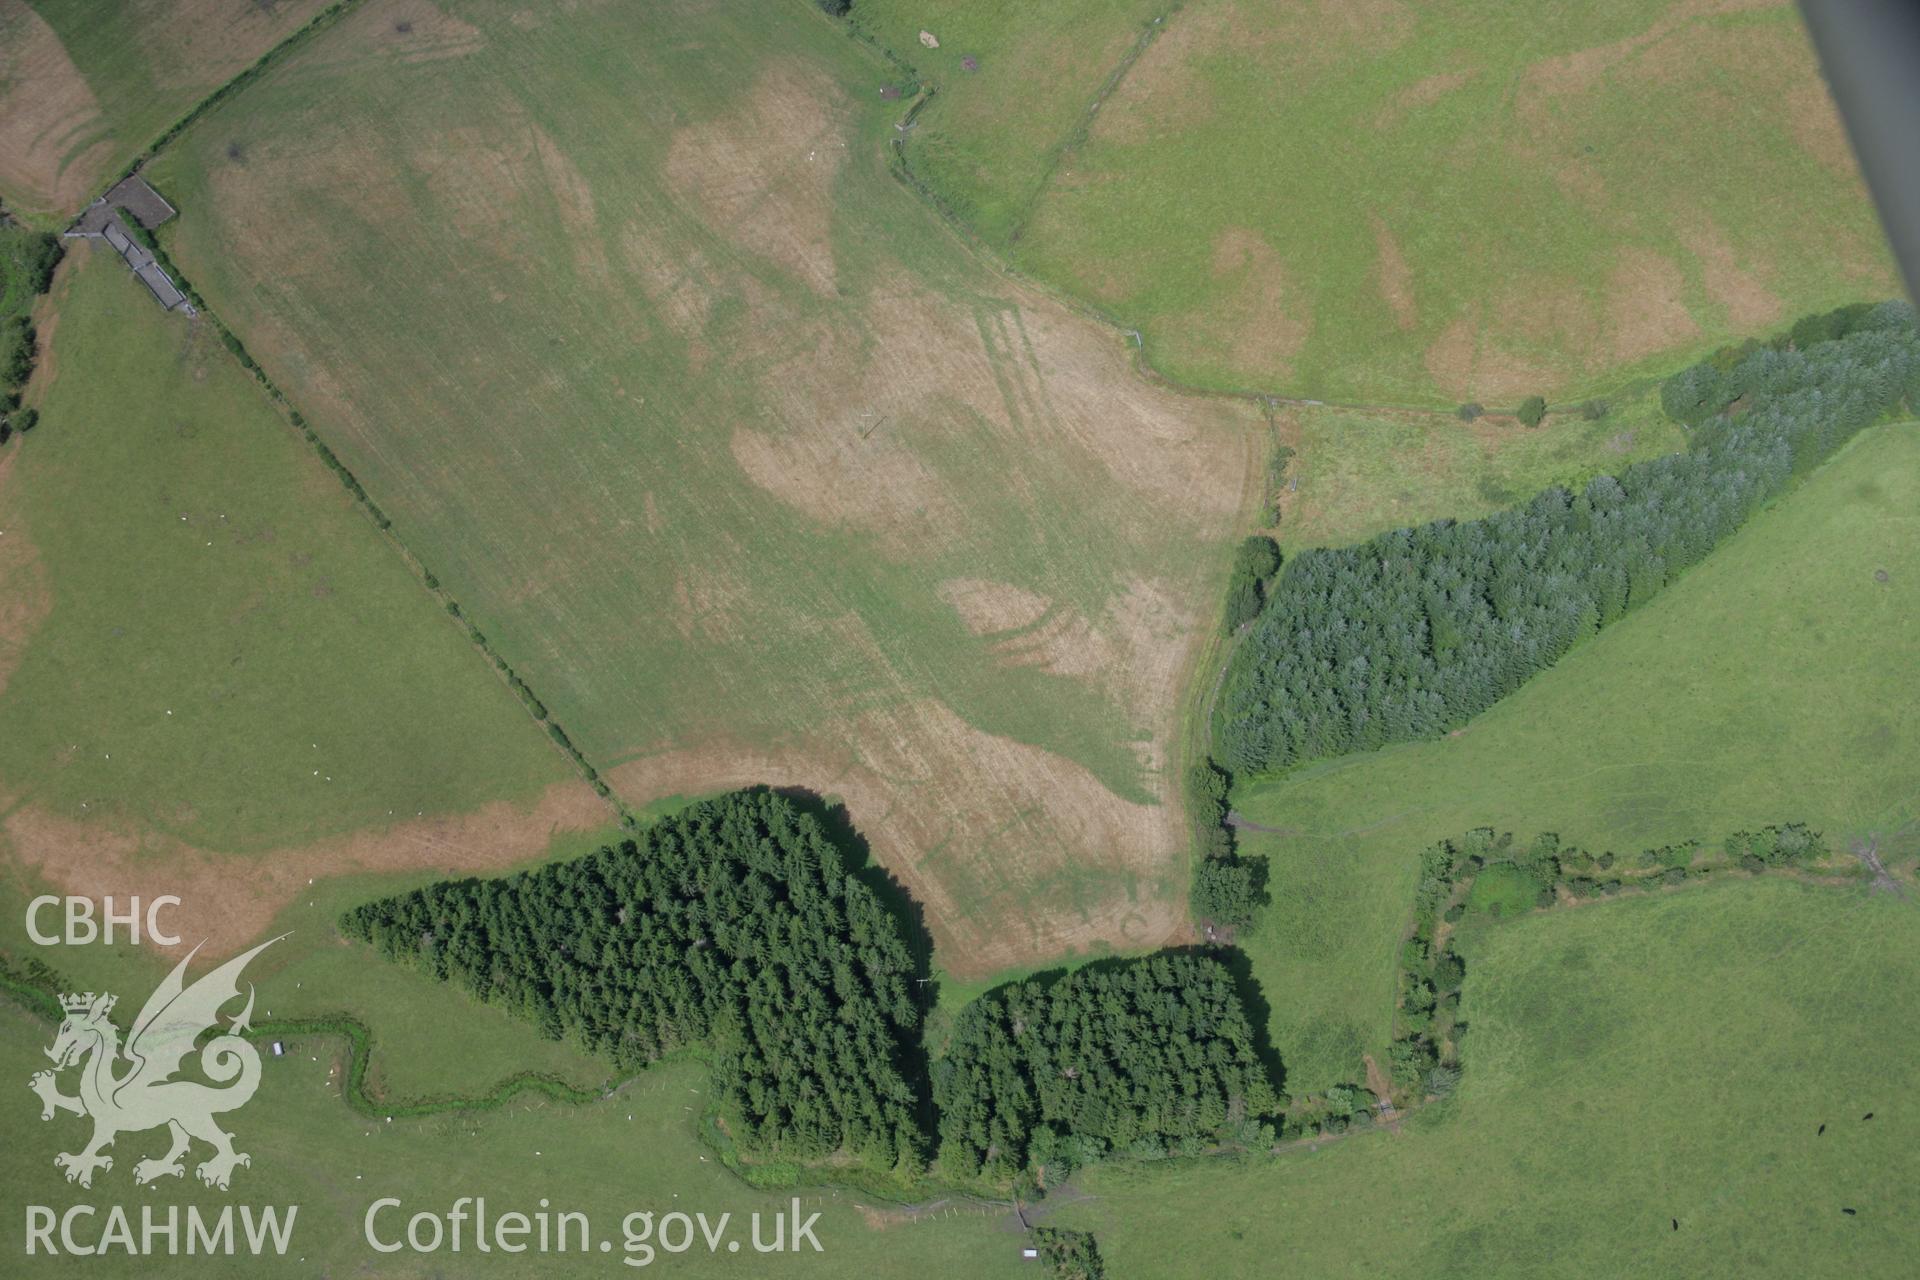 RCAHMW colour oblique aerial photograph of Llanfor Roman Military Complex visible in cropmarks, viewed from the south. Taken on 31 July 2006 by Toby Driver.